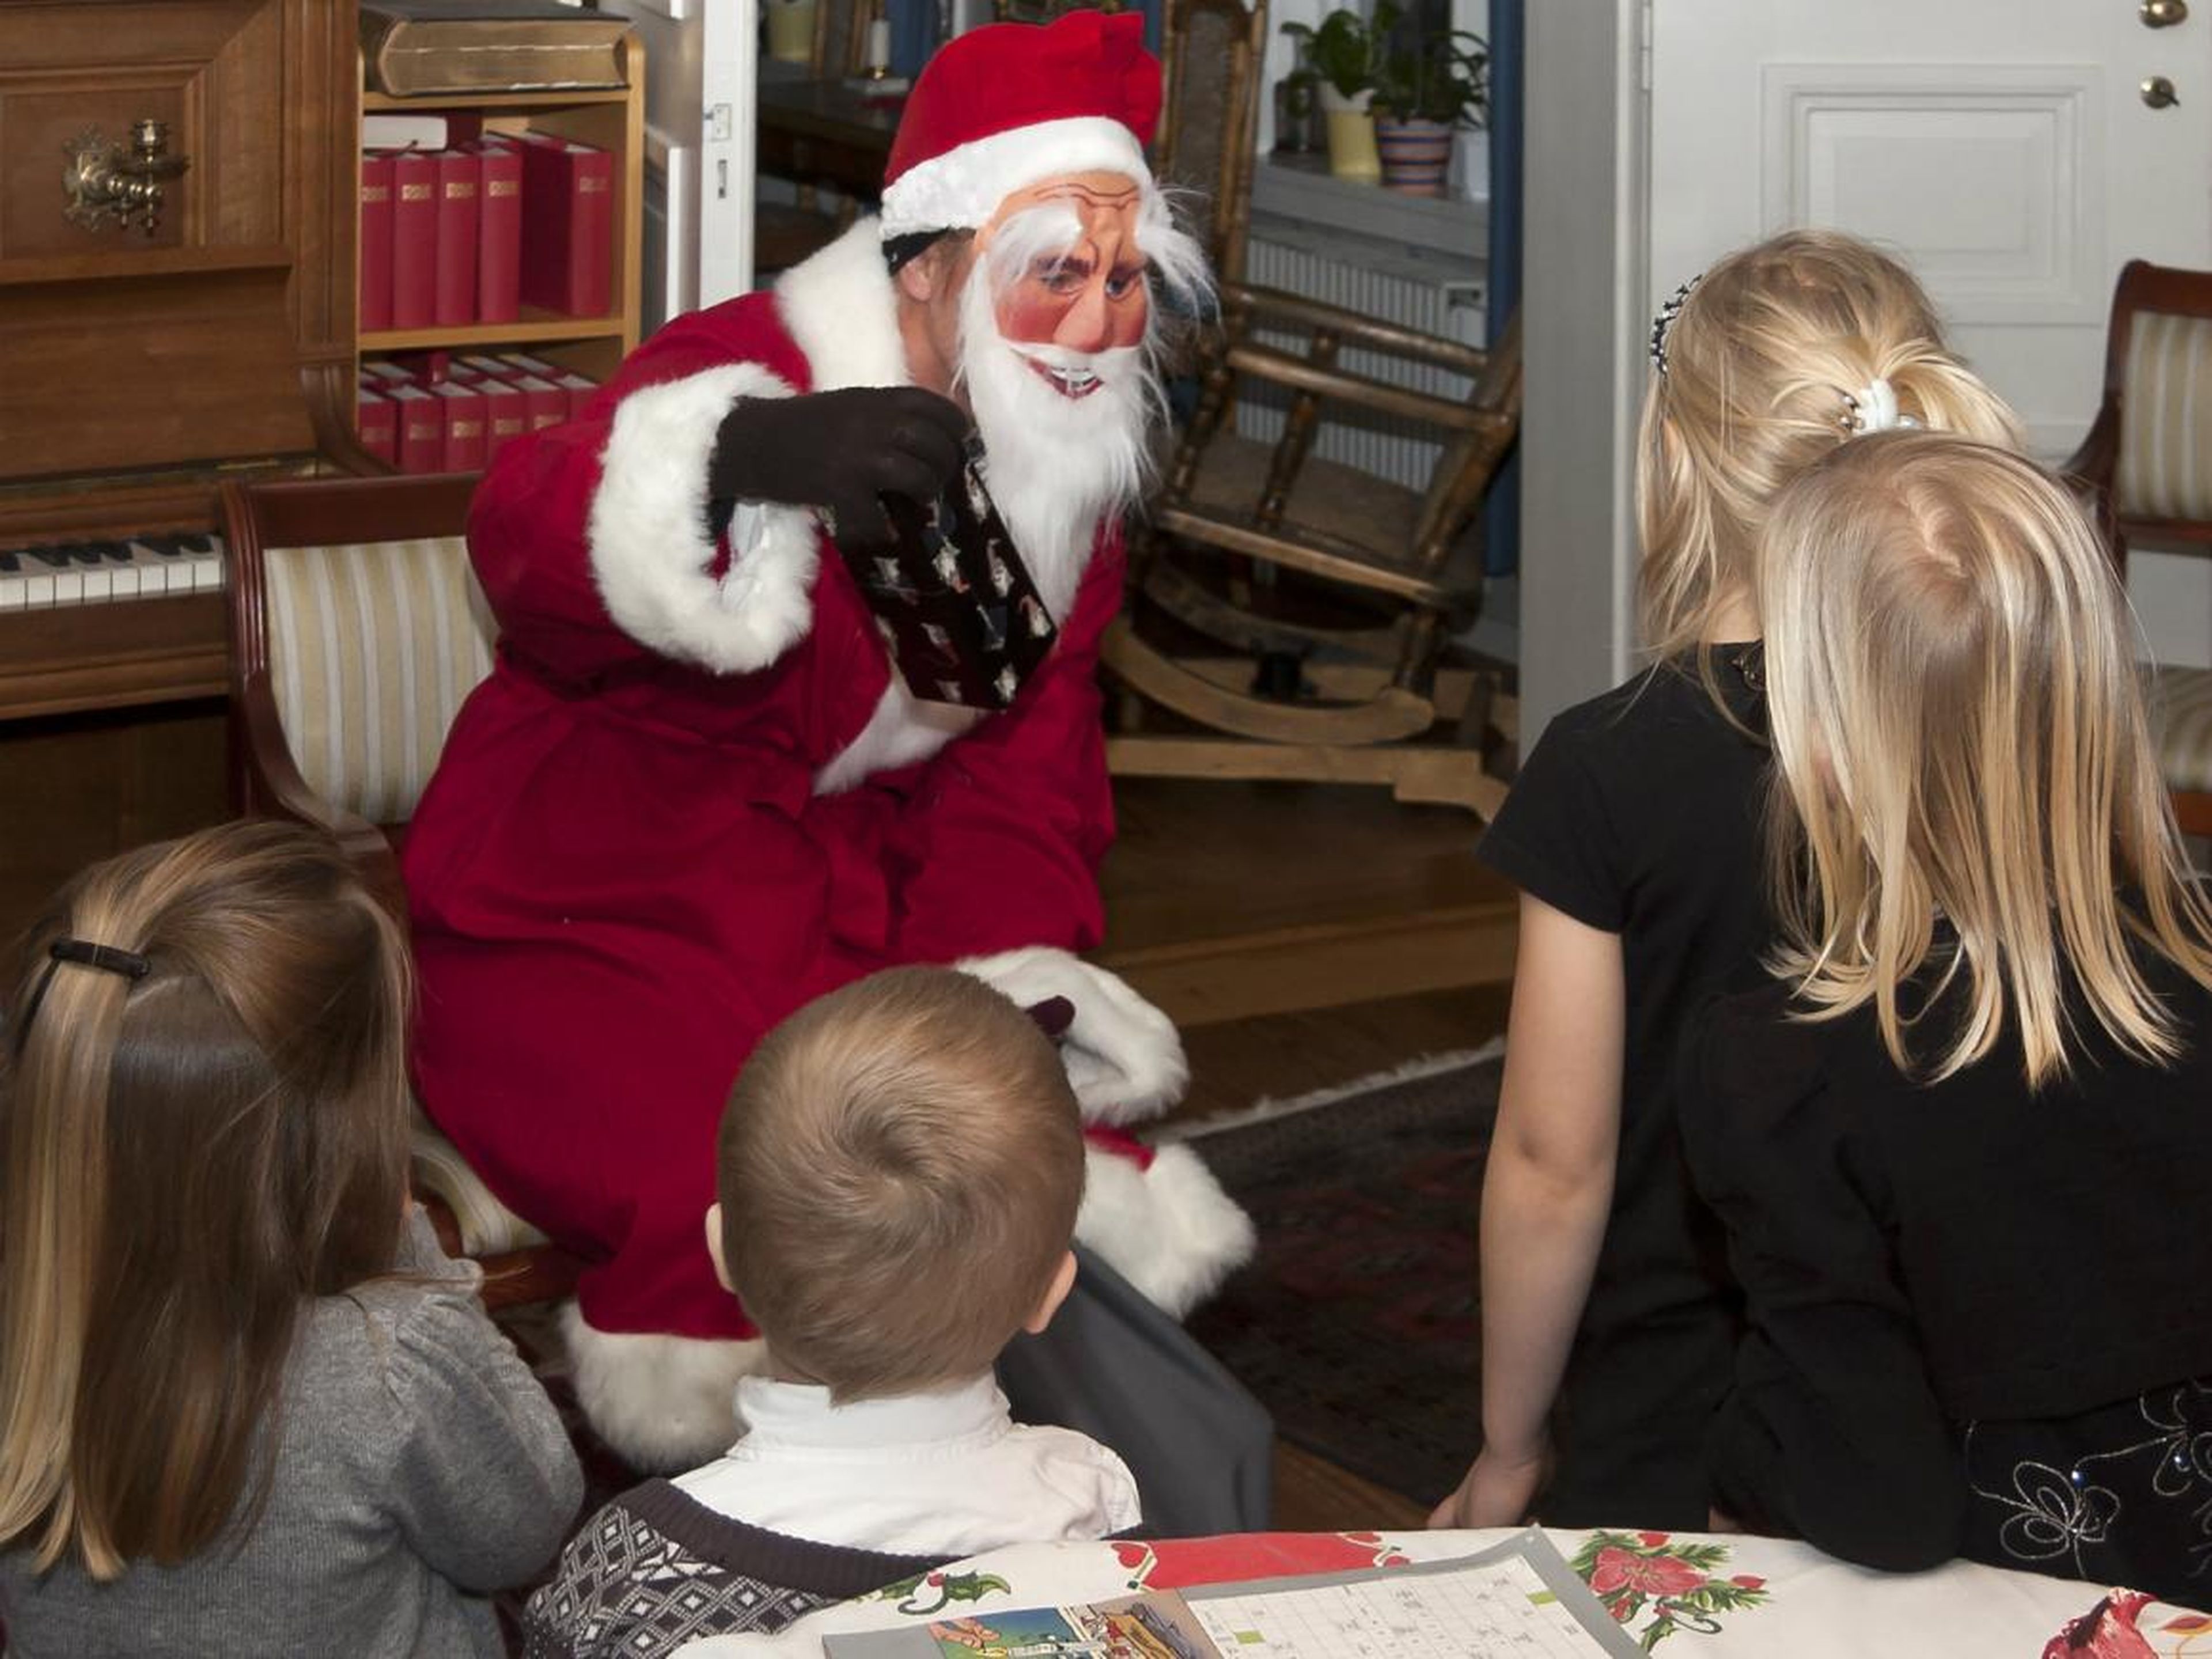 Tomte visits children in a Swedish home on Christmas Eve.